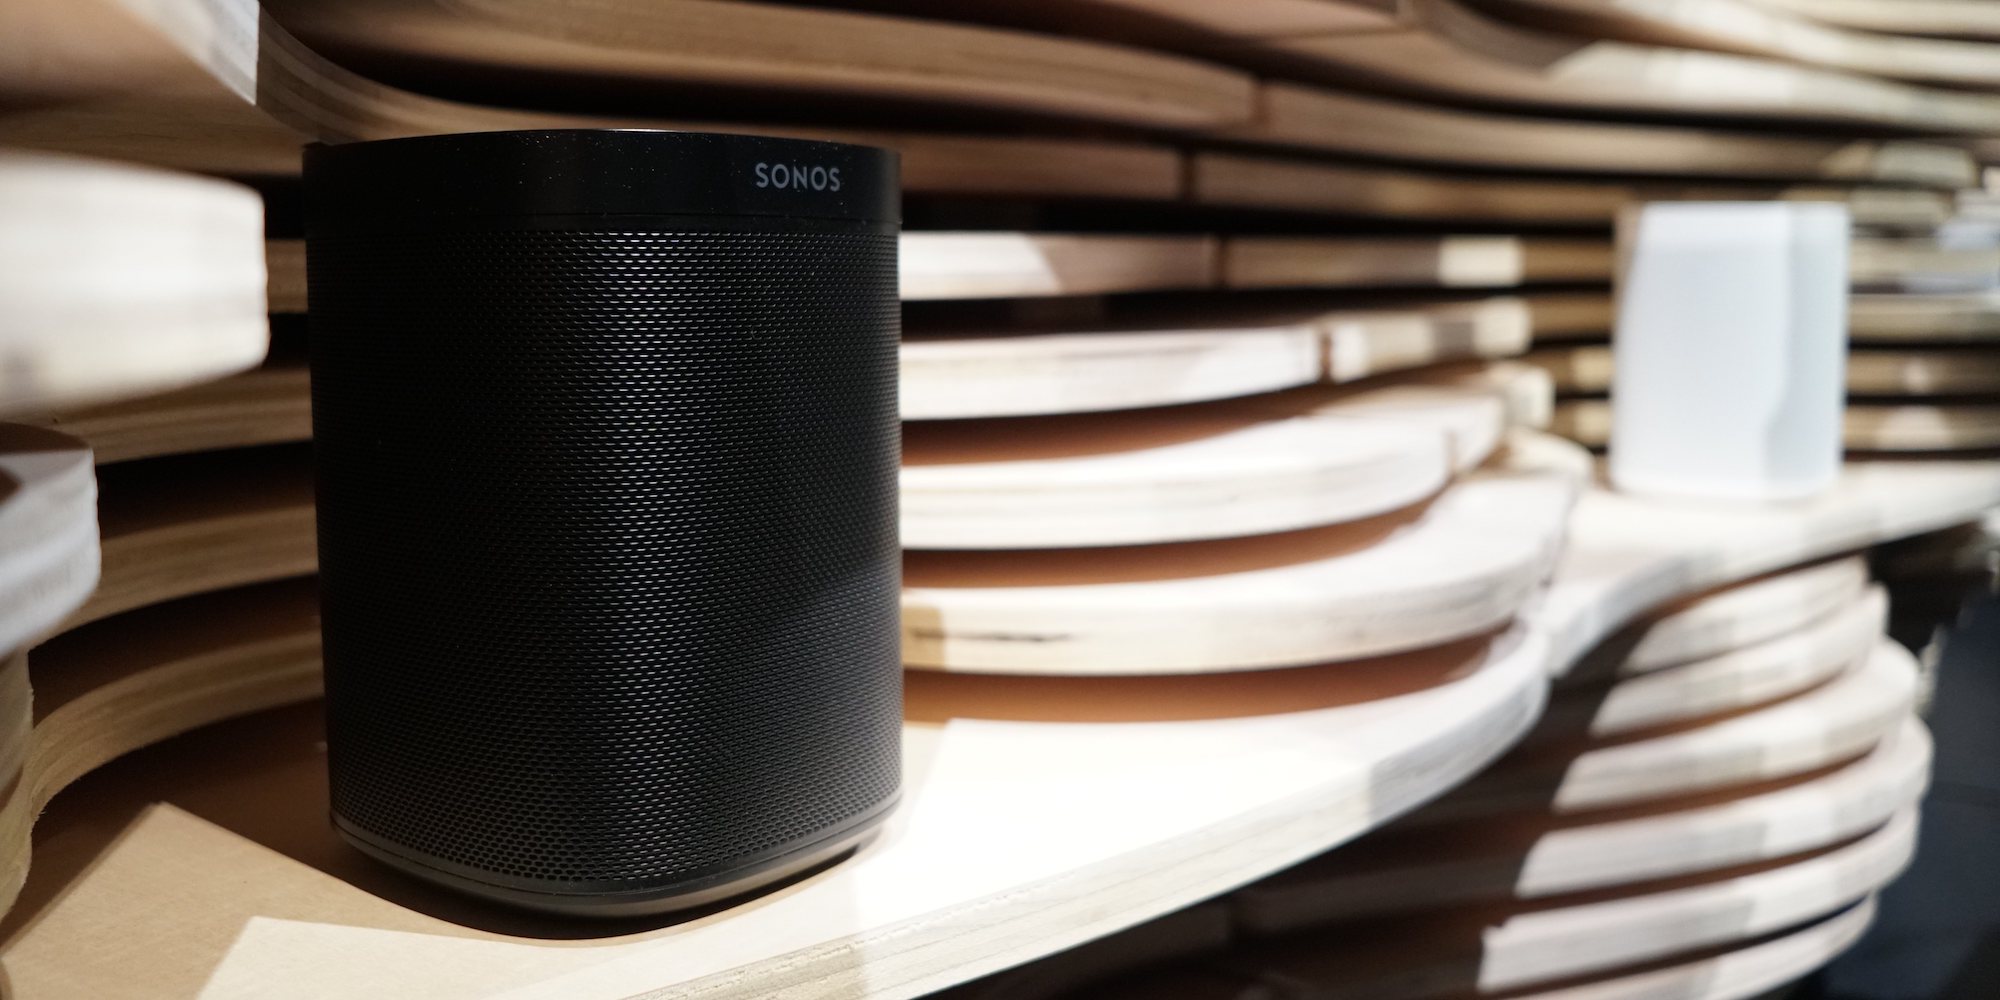 How to update Sonos speakers for AirPlay 2 and HomeKit -